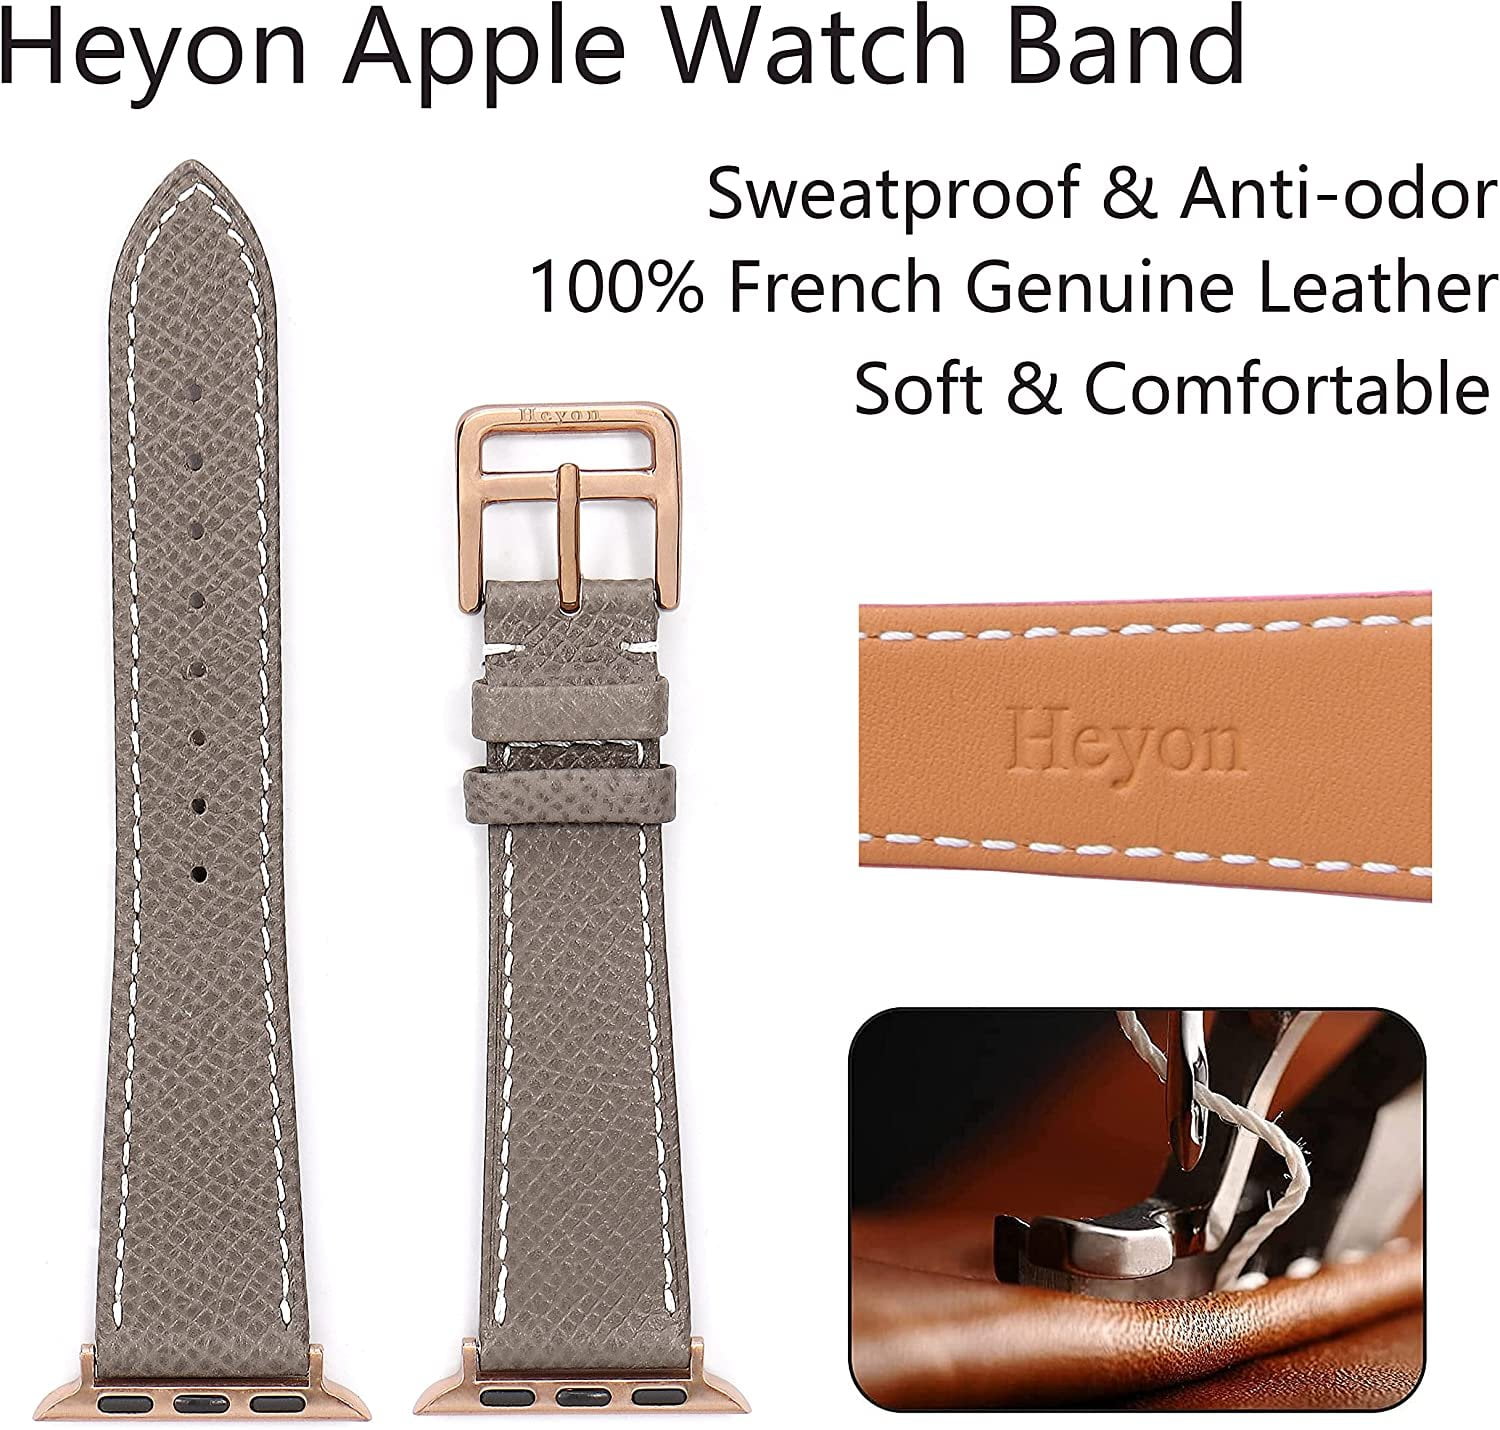 Compatible with Apple Watch (Small 38mm/40mm) Series 1,2,3,4 - Leather Band  Bracelet Strap Wristband Replacement - Multicolored Indian Elephants